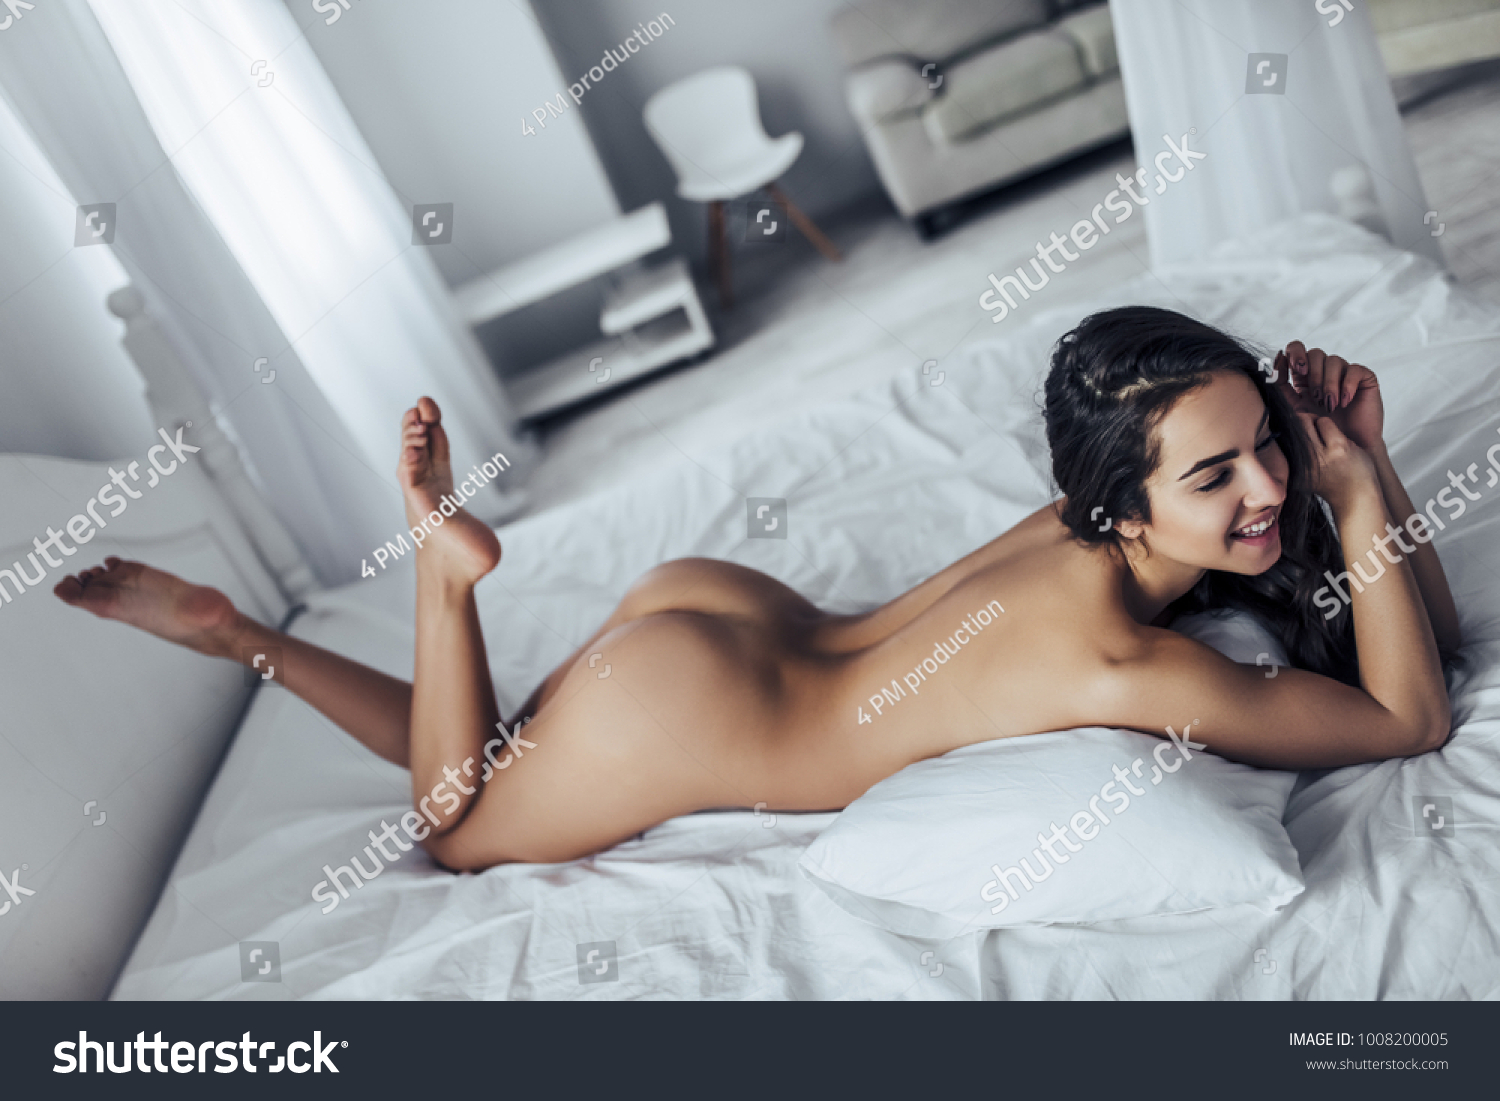 Erotic Young Nude Photo